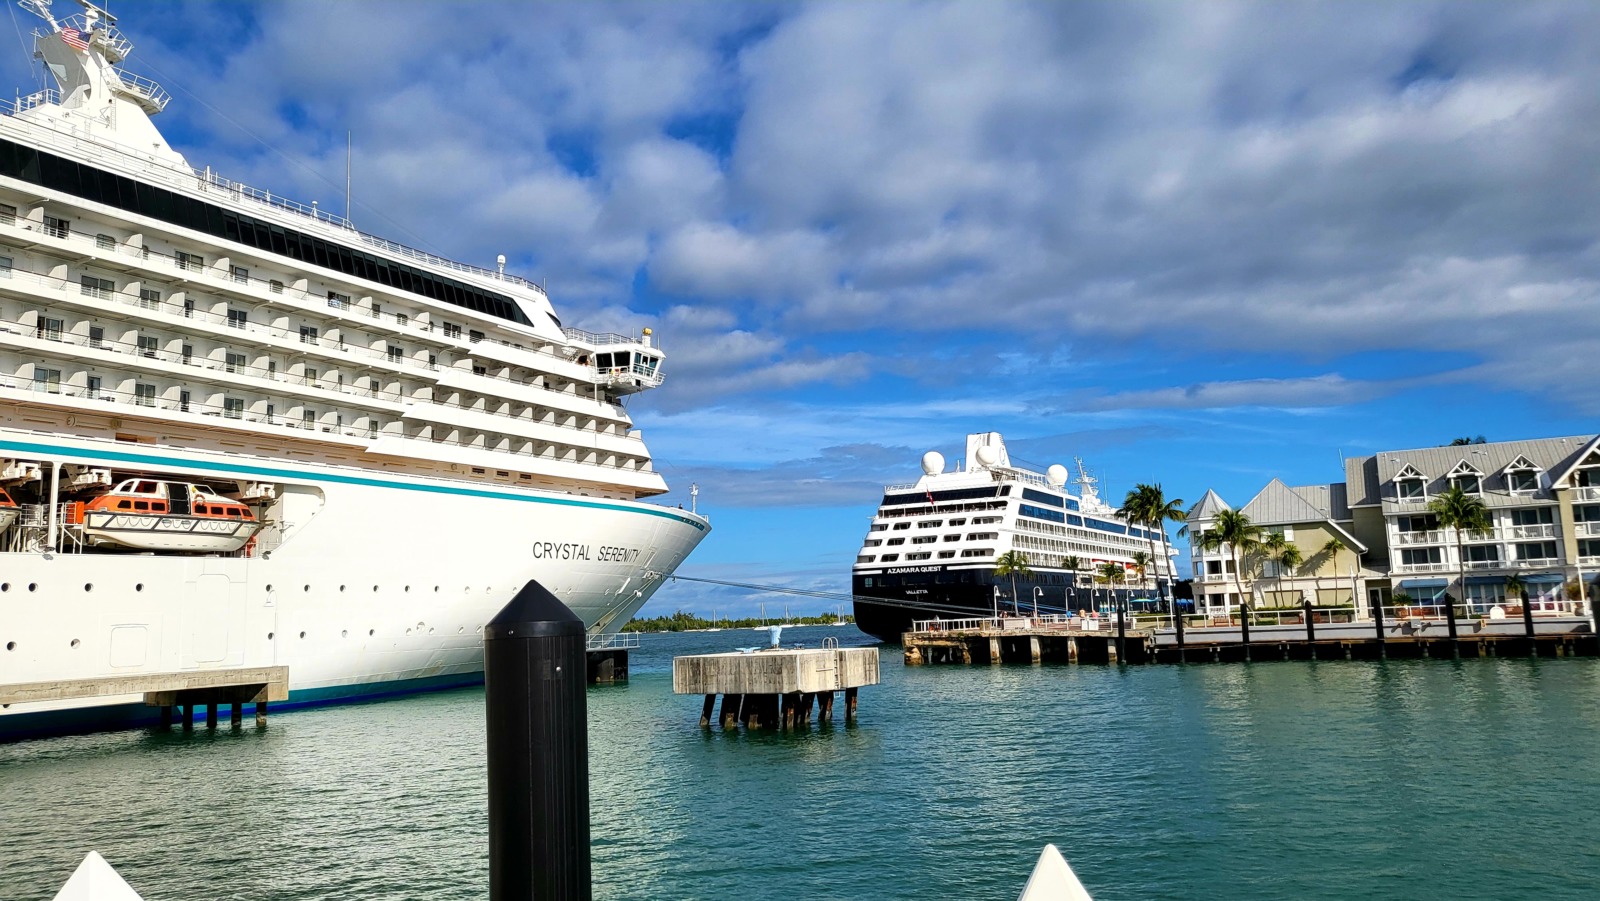 STATE SCRUTINIZES KEY WEST’S CRUISE SHIP RULES